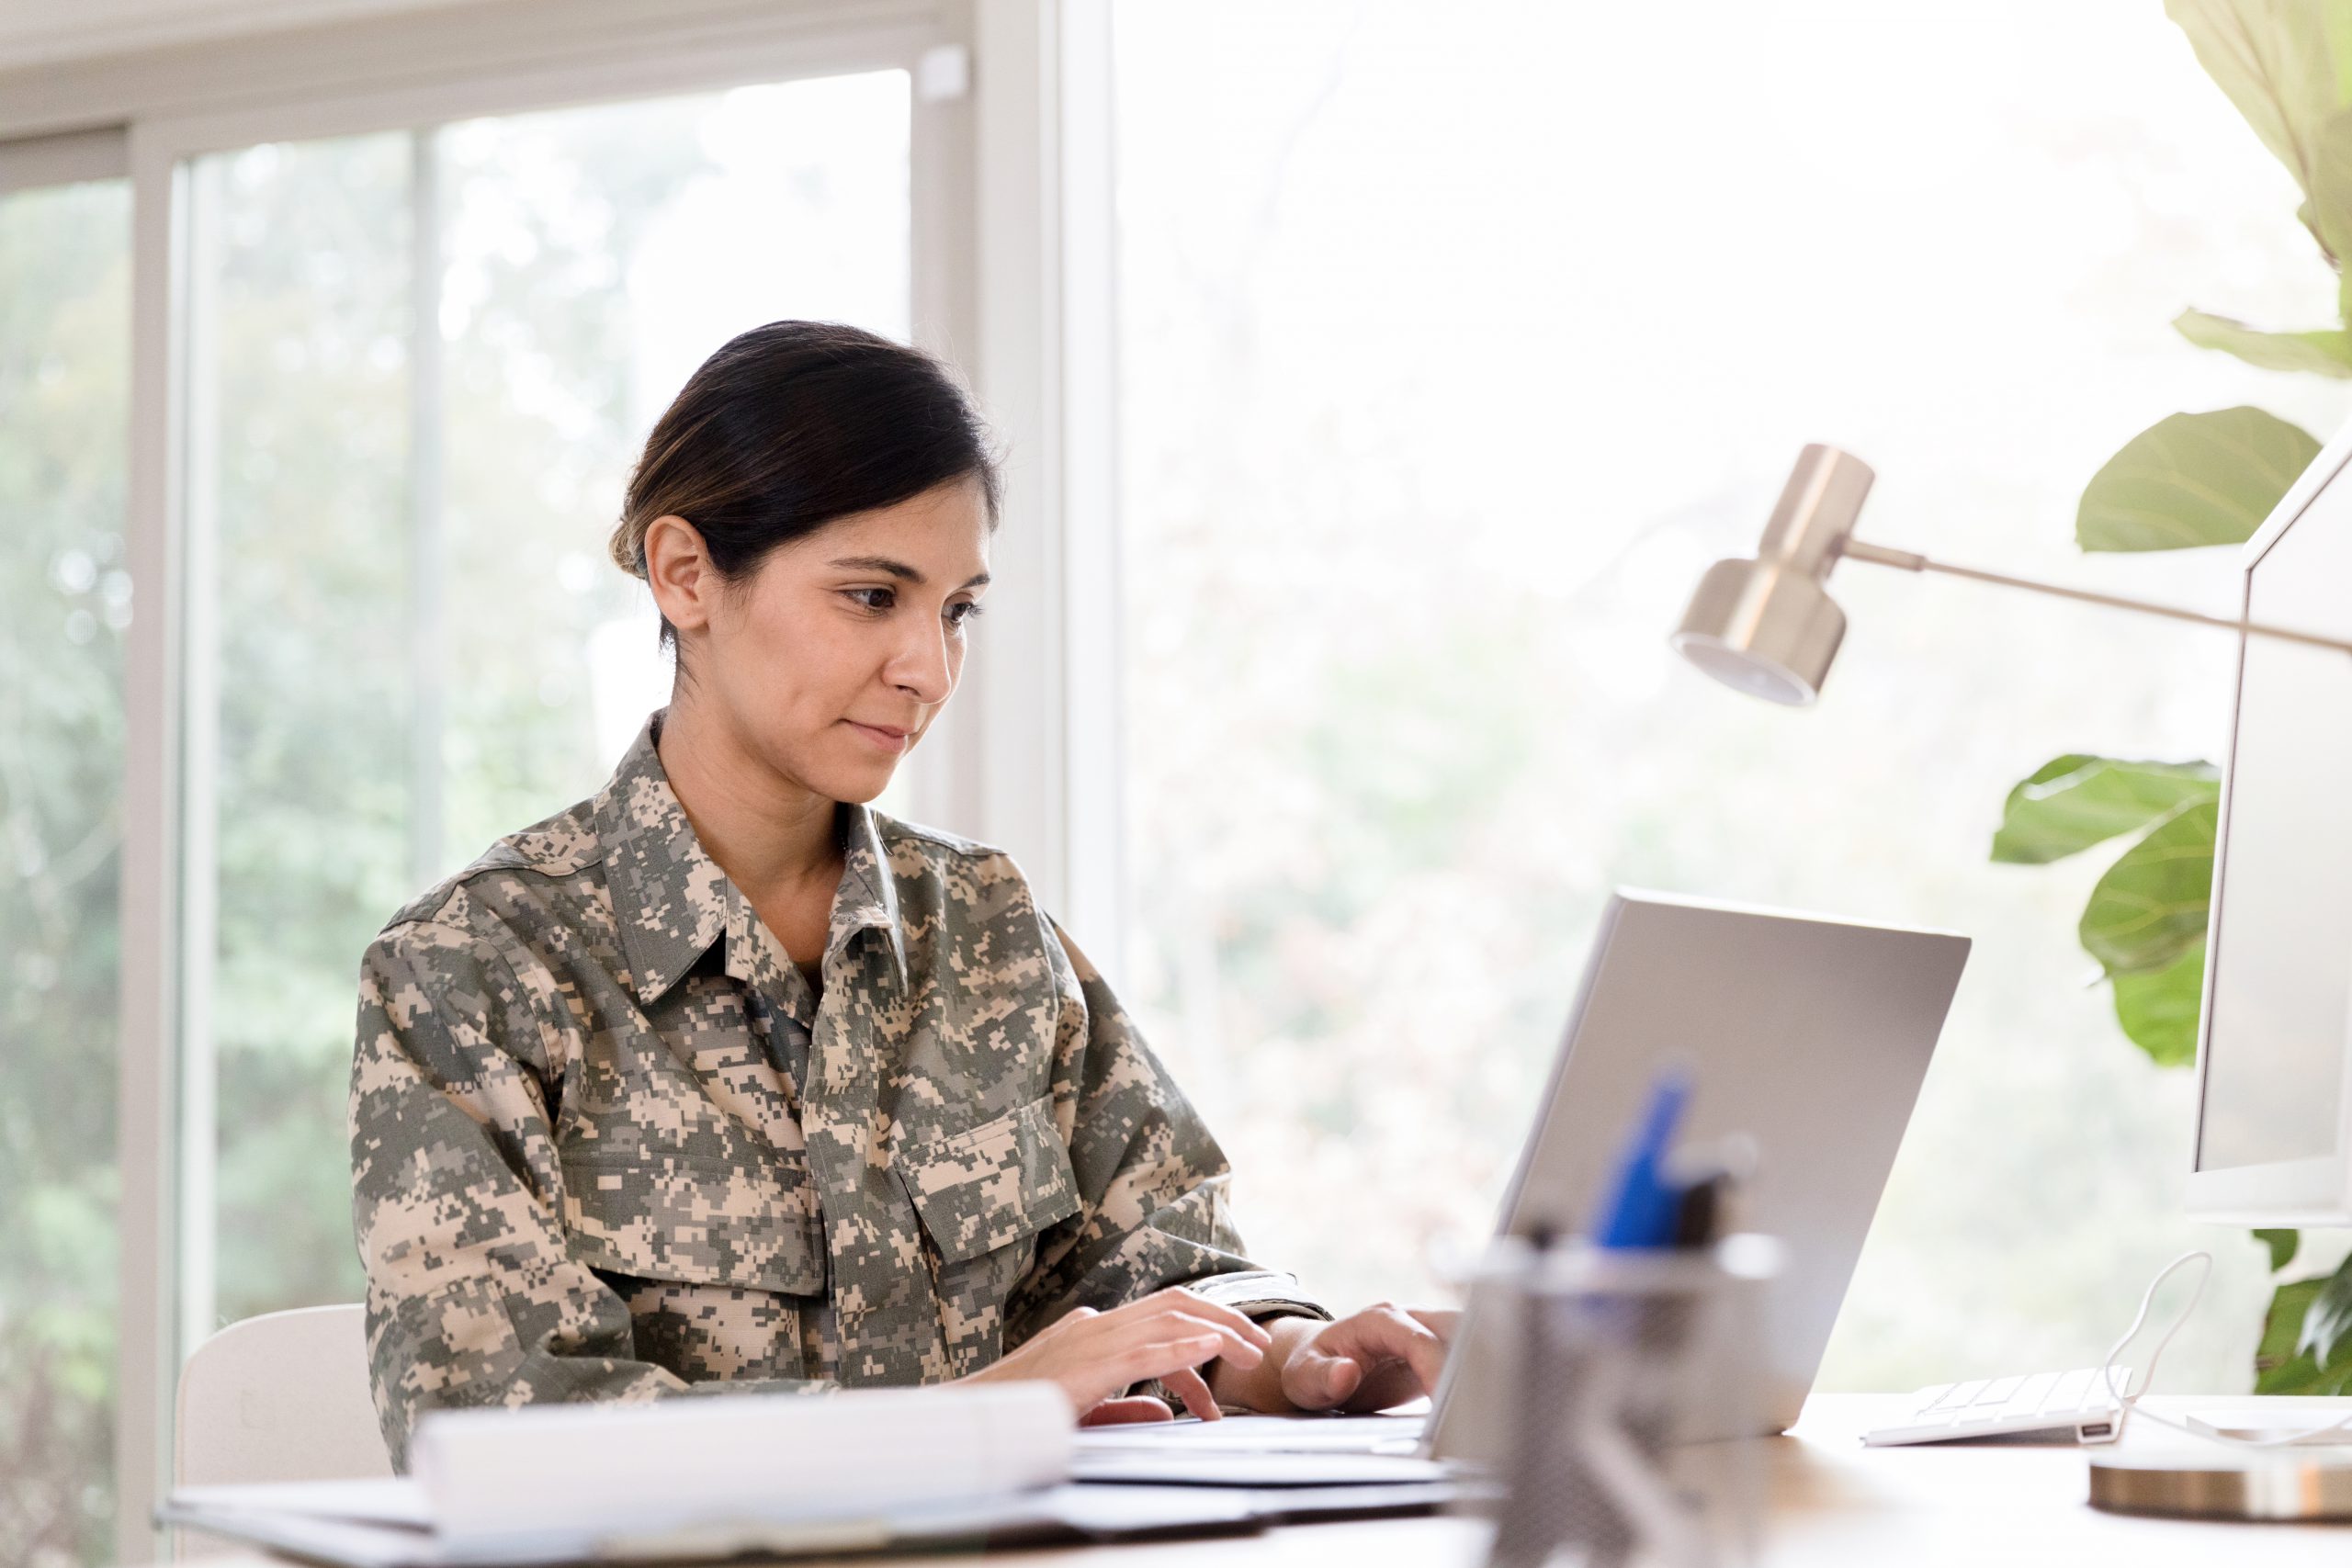 Female adult soldier voting remotely using Enhanced Voting.